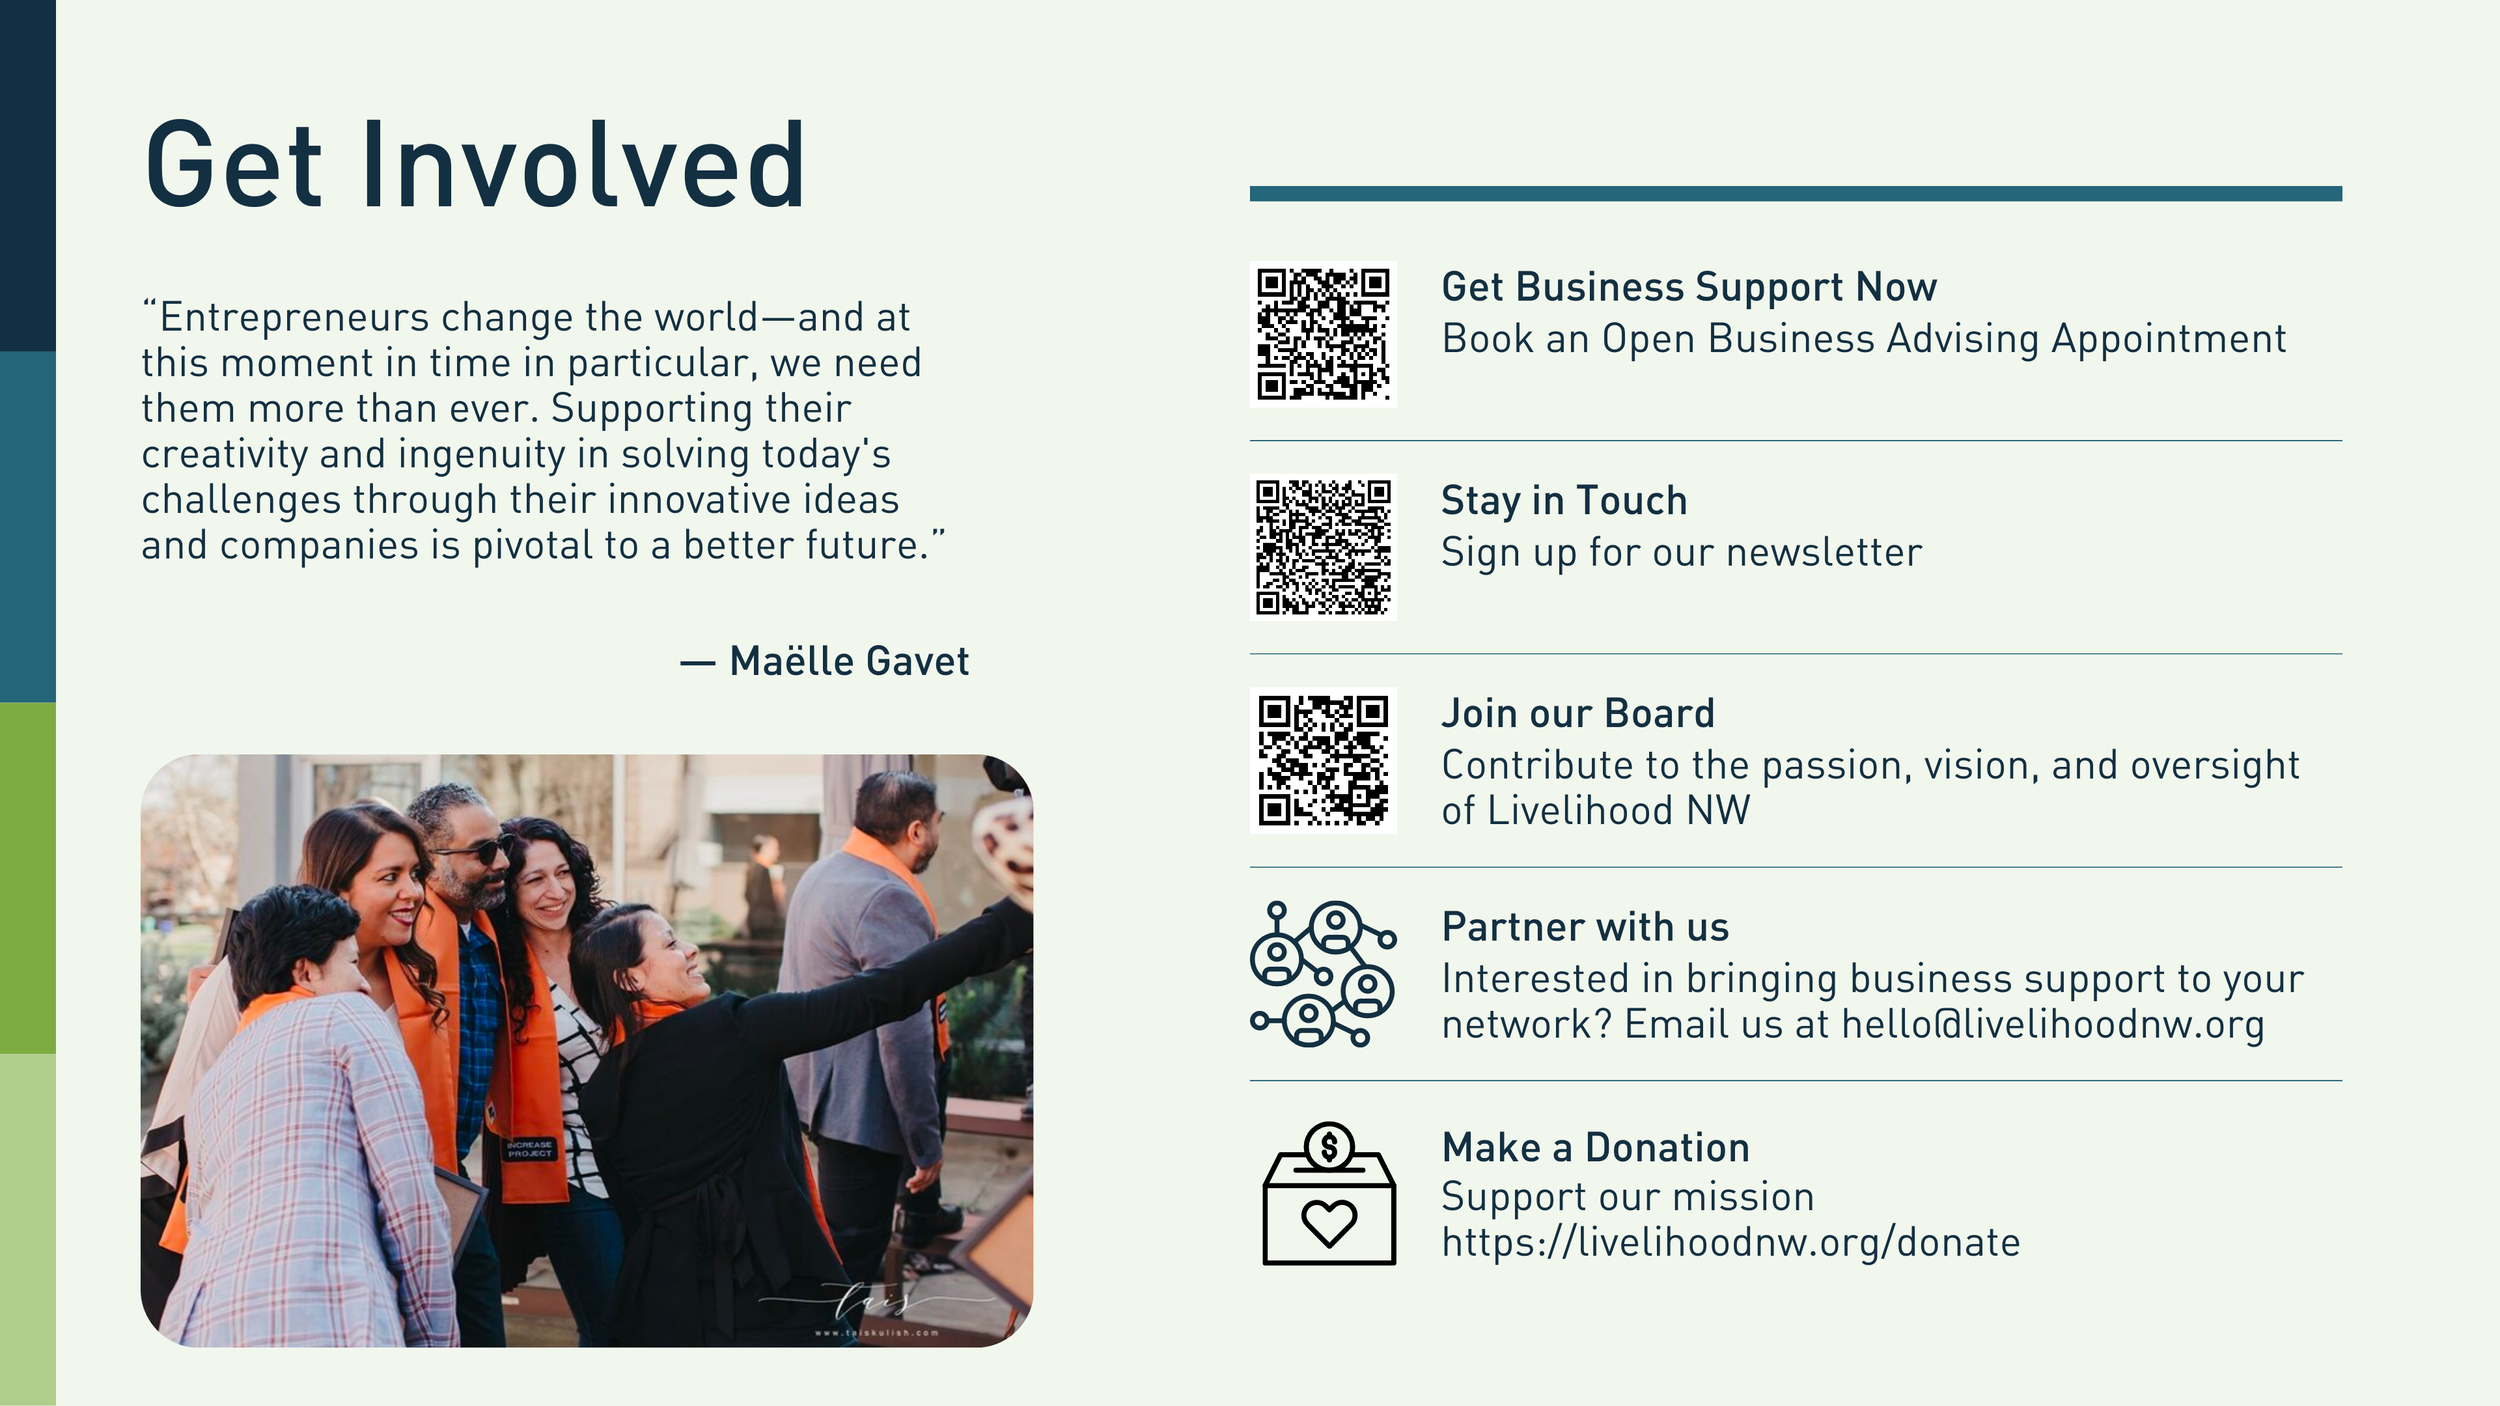   Open Business Advising  |  Newsletter Signup  |  Join Our Board  |  Partner With Us  |  Tais Photography  |  Make a Donation  